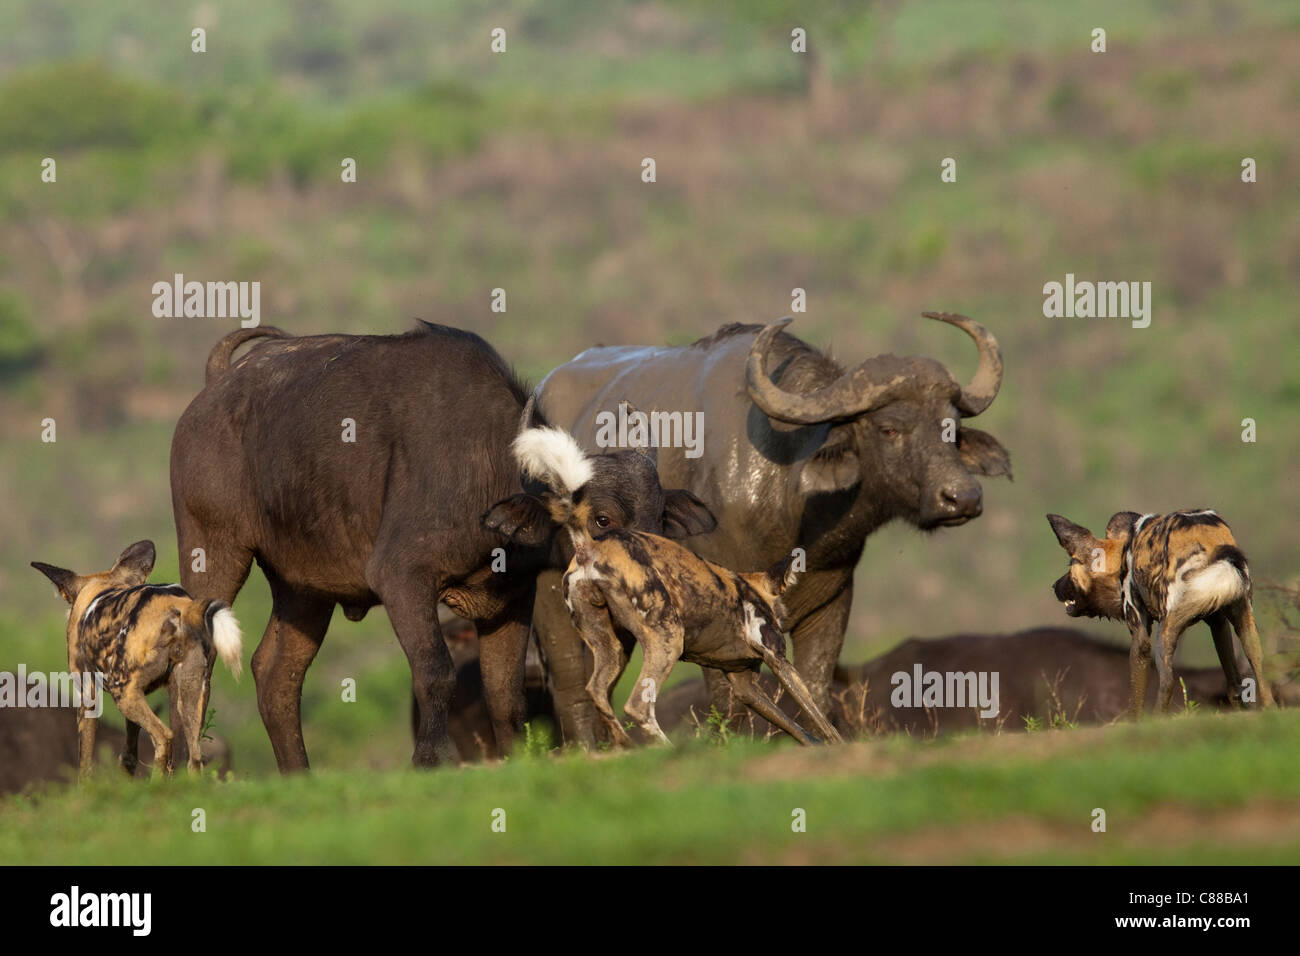 African Wild Dog (Lycaon pictus) interaction with Buffalo (Syncerus caffer) at a waterhole. Stock Photo